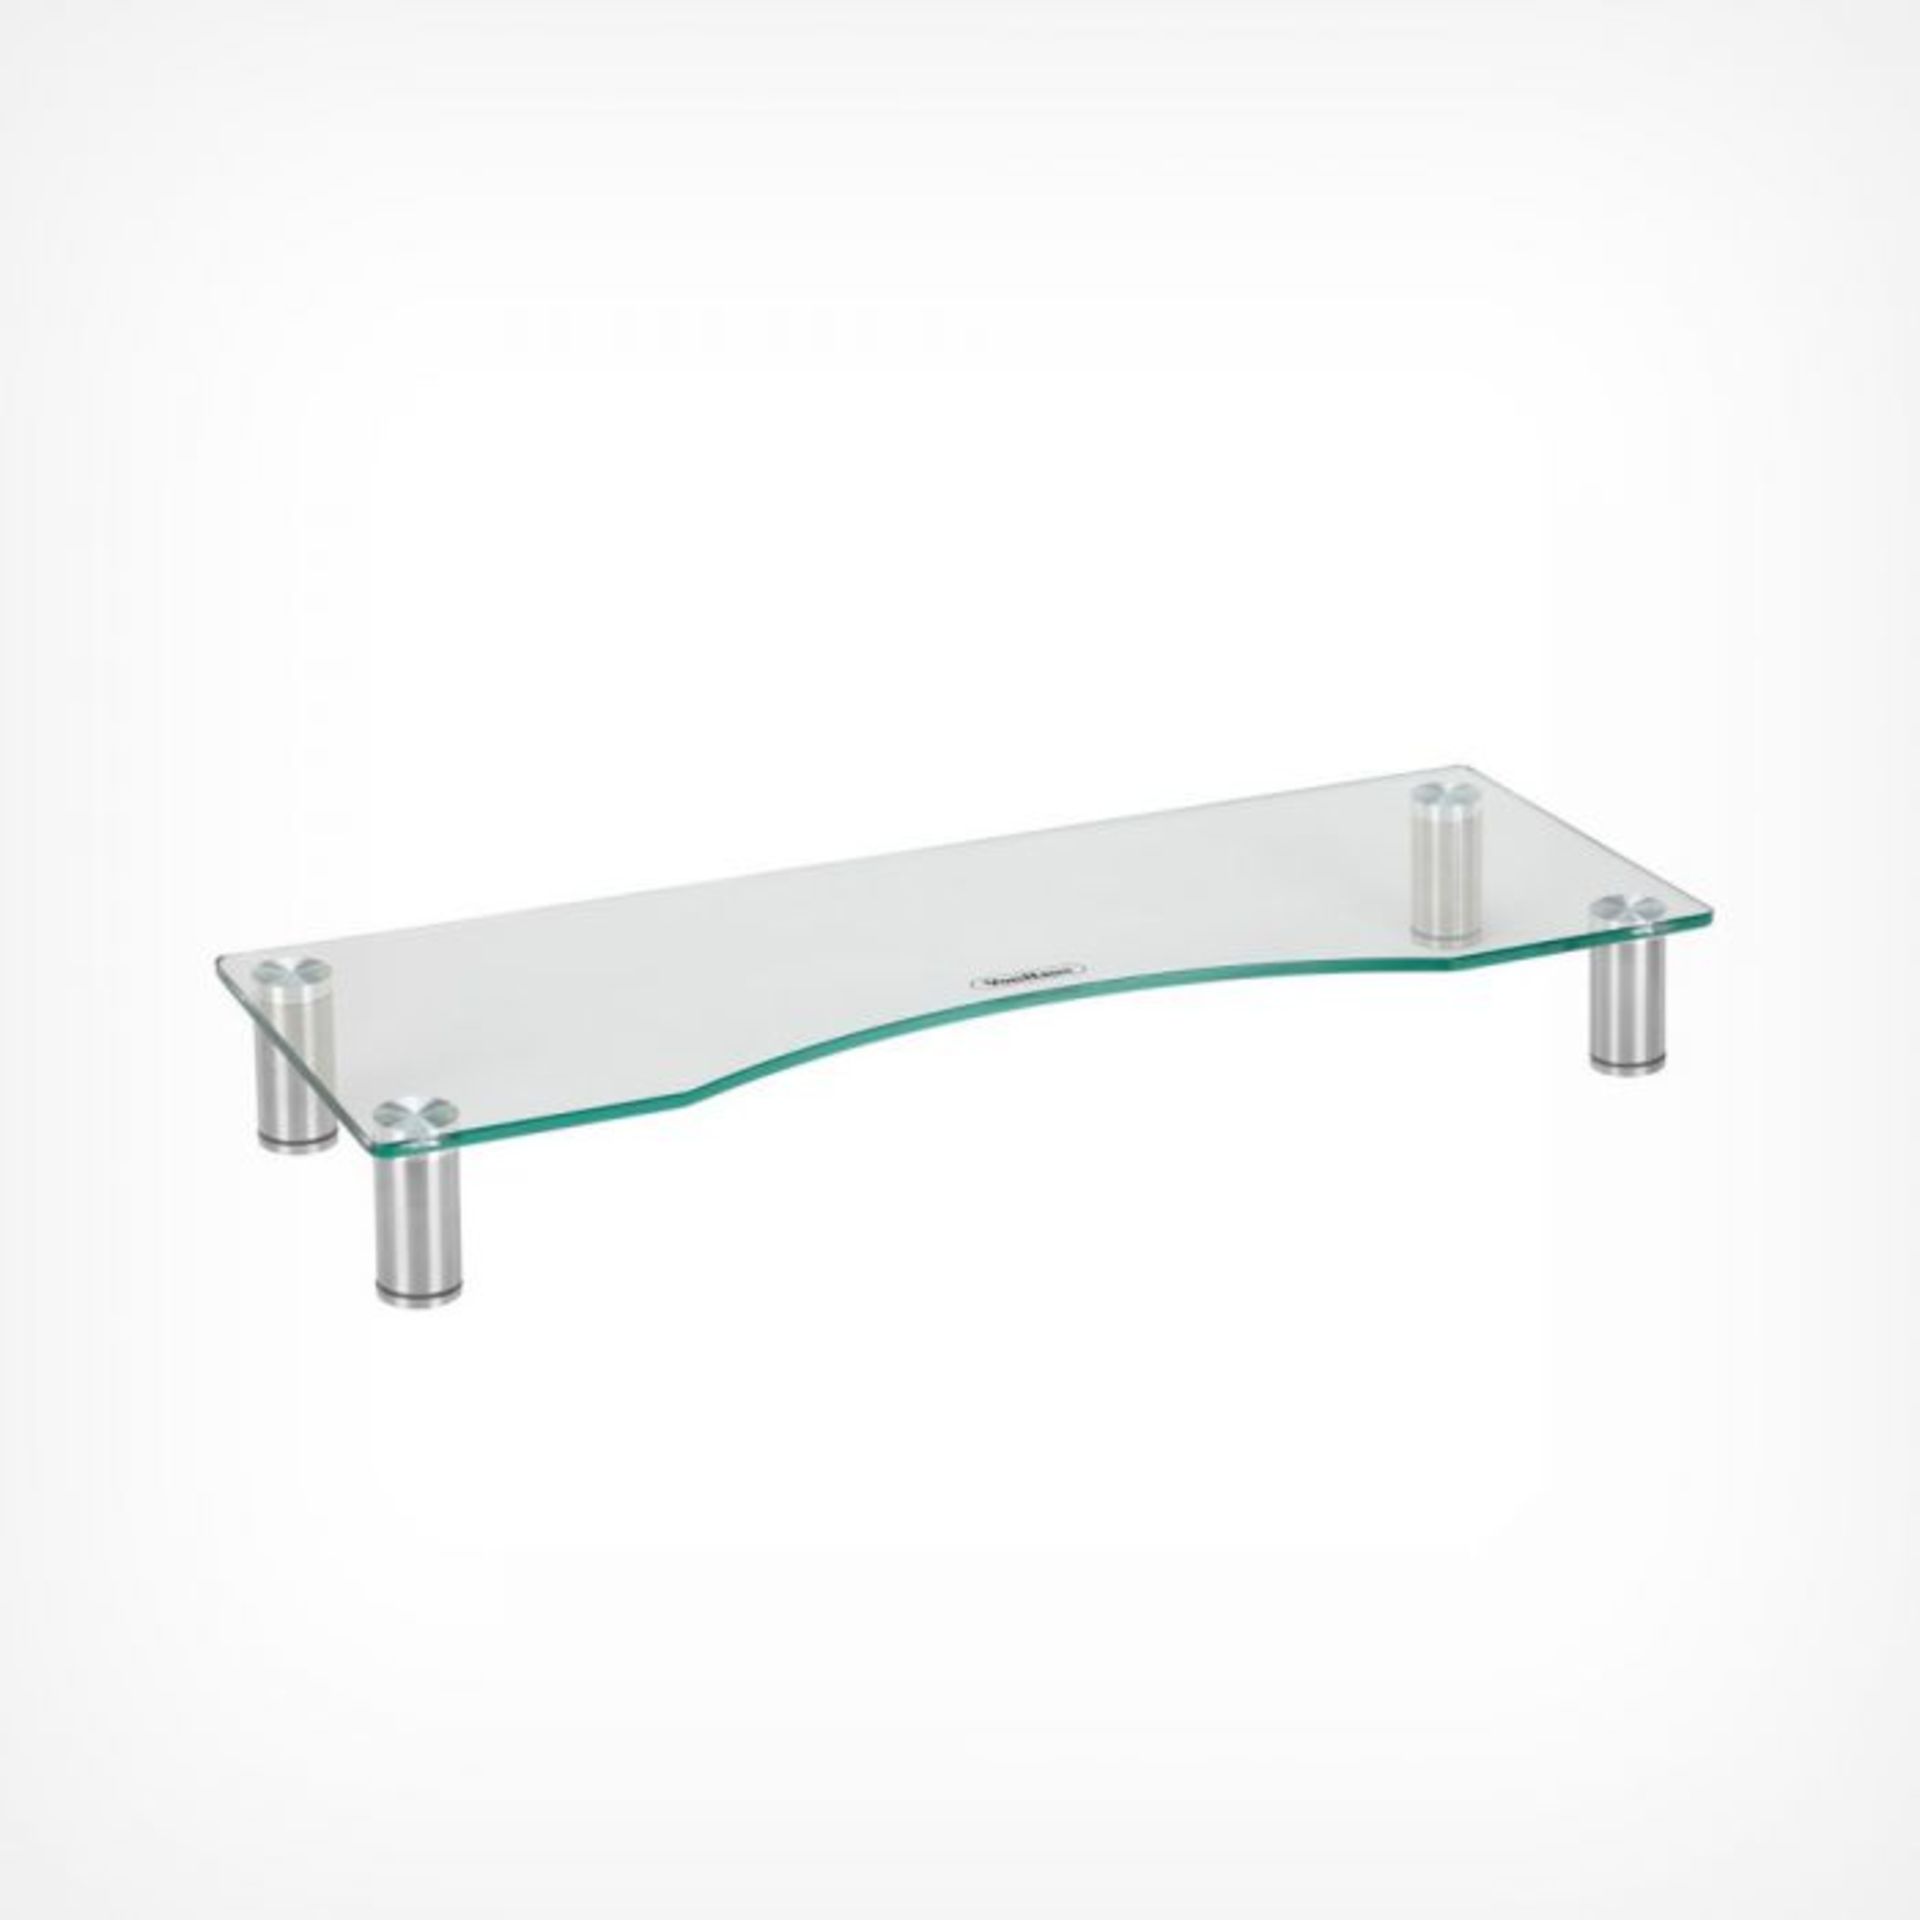 Large Glass Monitor Stand. Made from ultra-strong 8mm thick clear tempered glass - 5 times